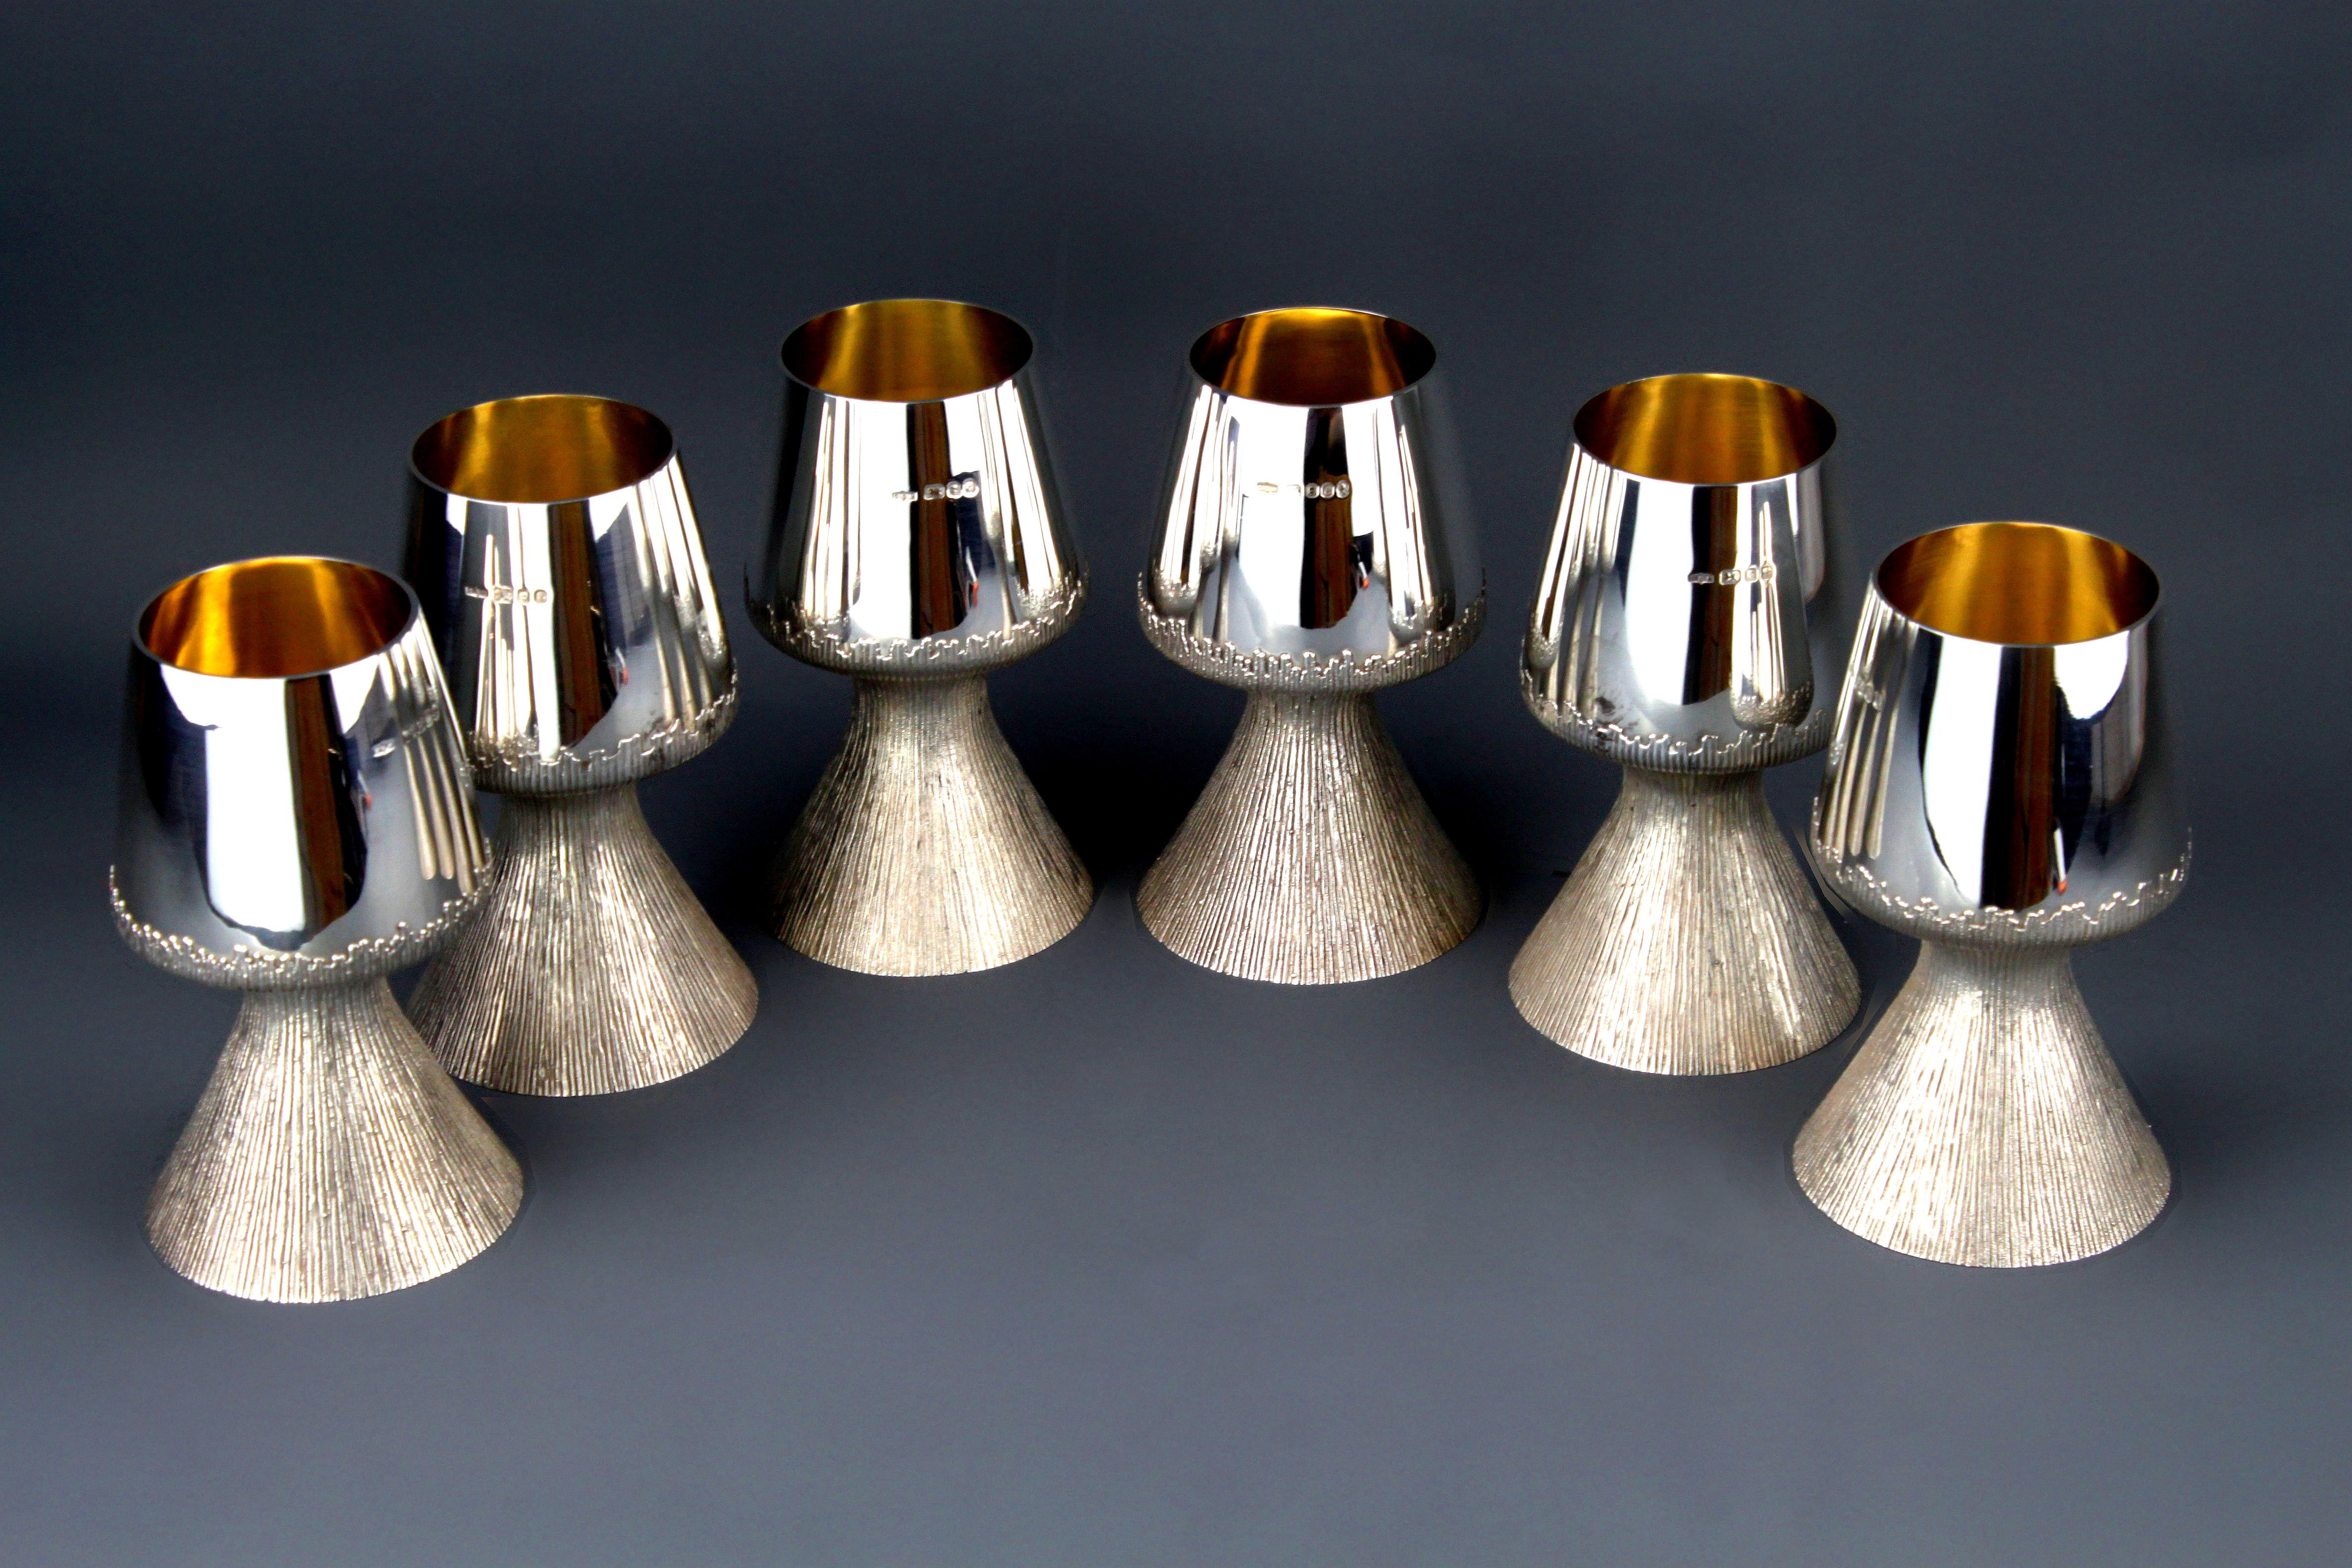 Vintage set of sterling silver decanter and 6 goblets
Made in England, London, 1974
Retailed by: Asprey & Co.
Silver maker: GGM
Fully hallmarked.

Dimensions:
Decanter size: D/H 16 x 21 cm
Weight 921 g
Goblet size: D/H 8 x 14 cm
Weight: